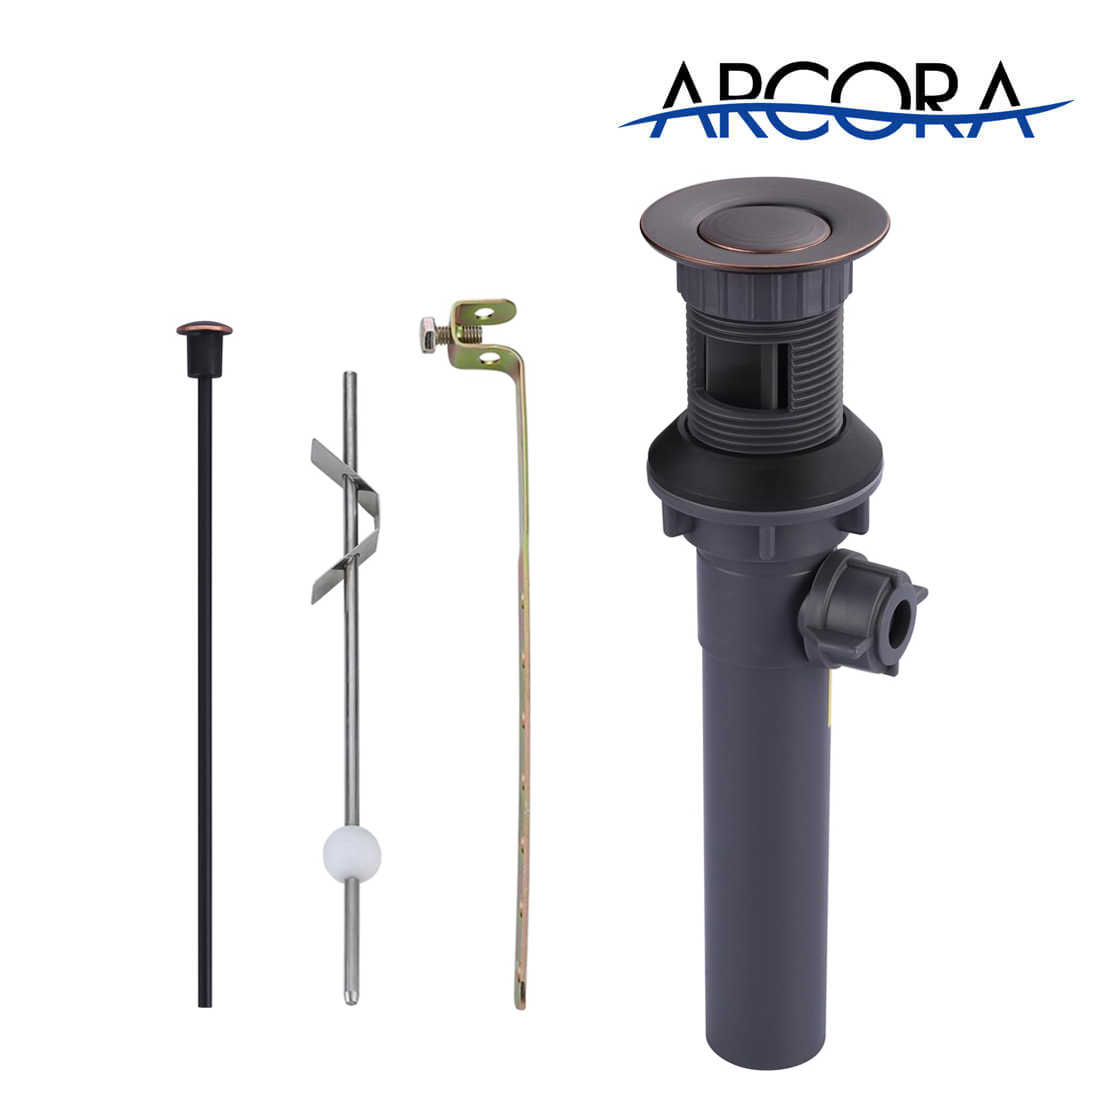 ARCORA Oil Rubbed Bronze Bathroom Sink Drain with Overflow & Lift Rod for Vessel Sink